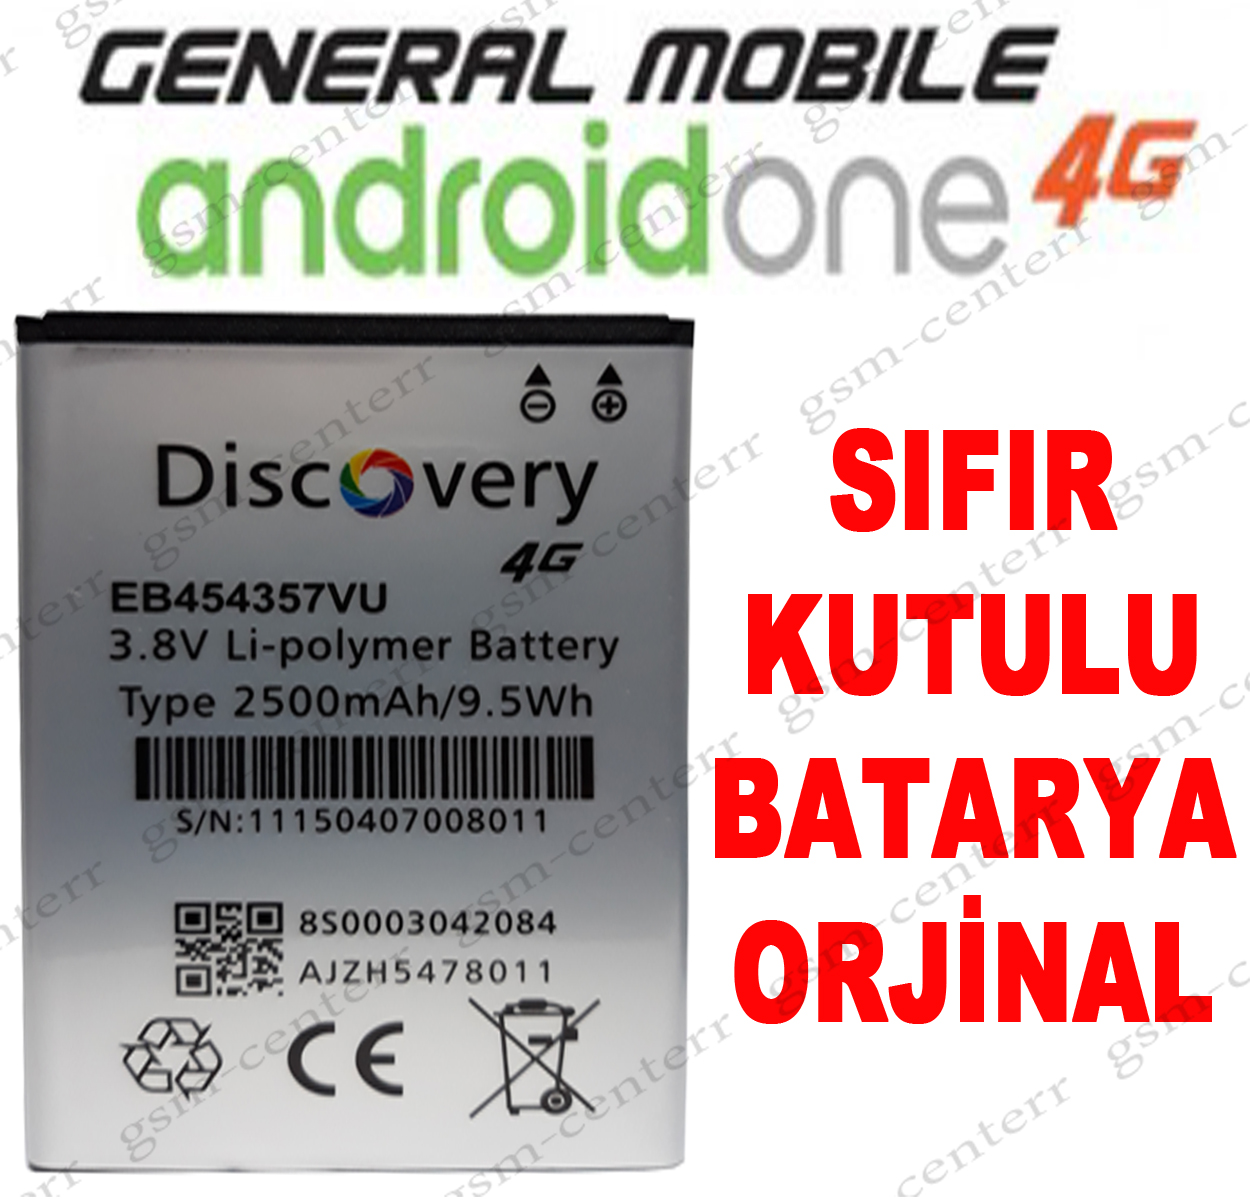 General Mobile Discovery Android One 4G Batarya